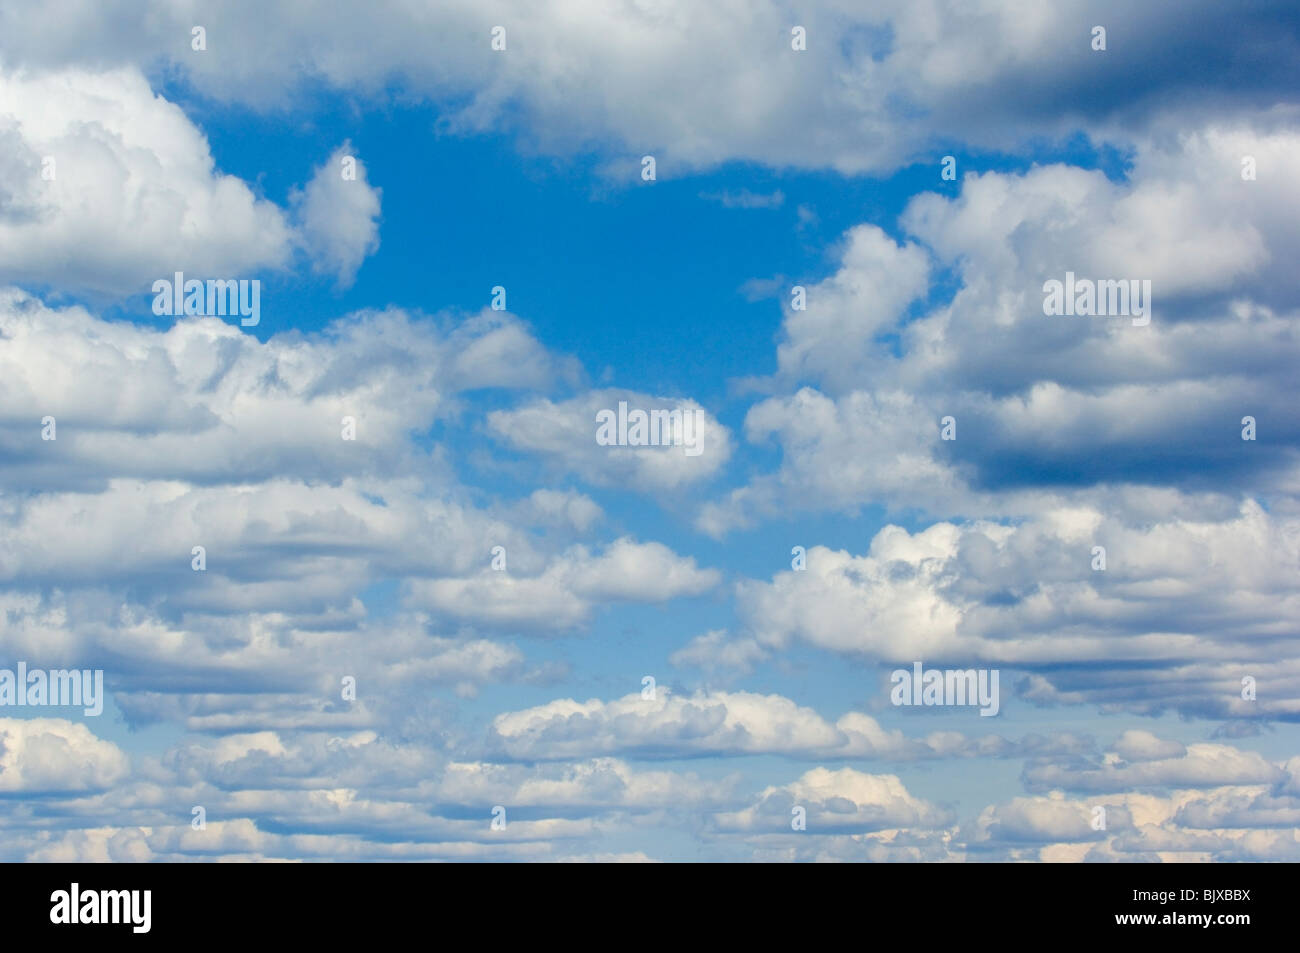 A blue sky filled with white puffy clouds Stock Photo